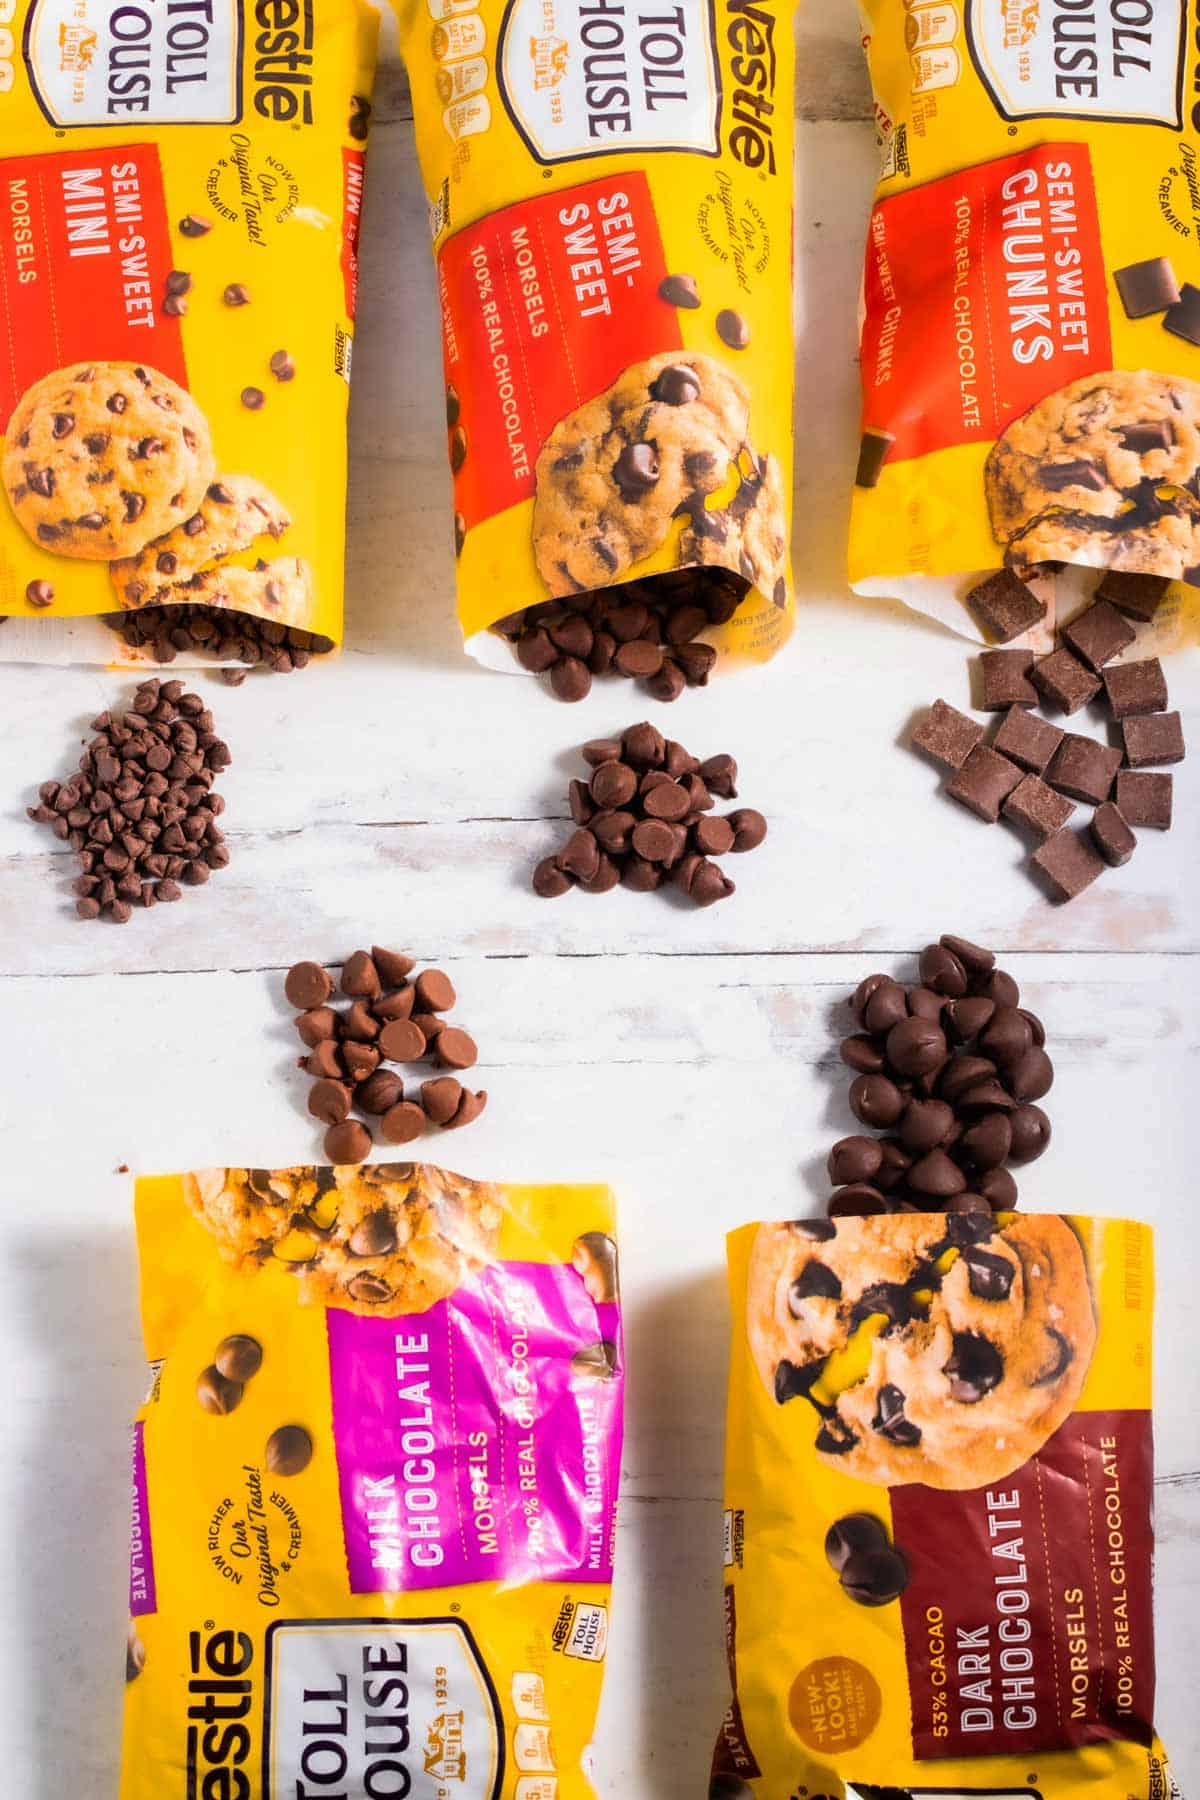 Several bags of chocolate chips of various sizes.